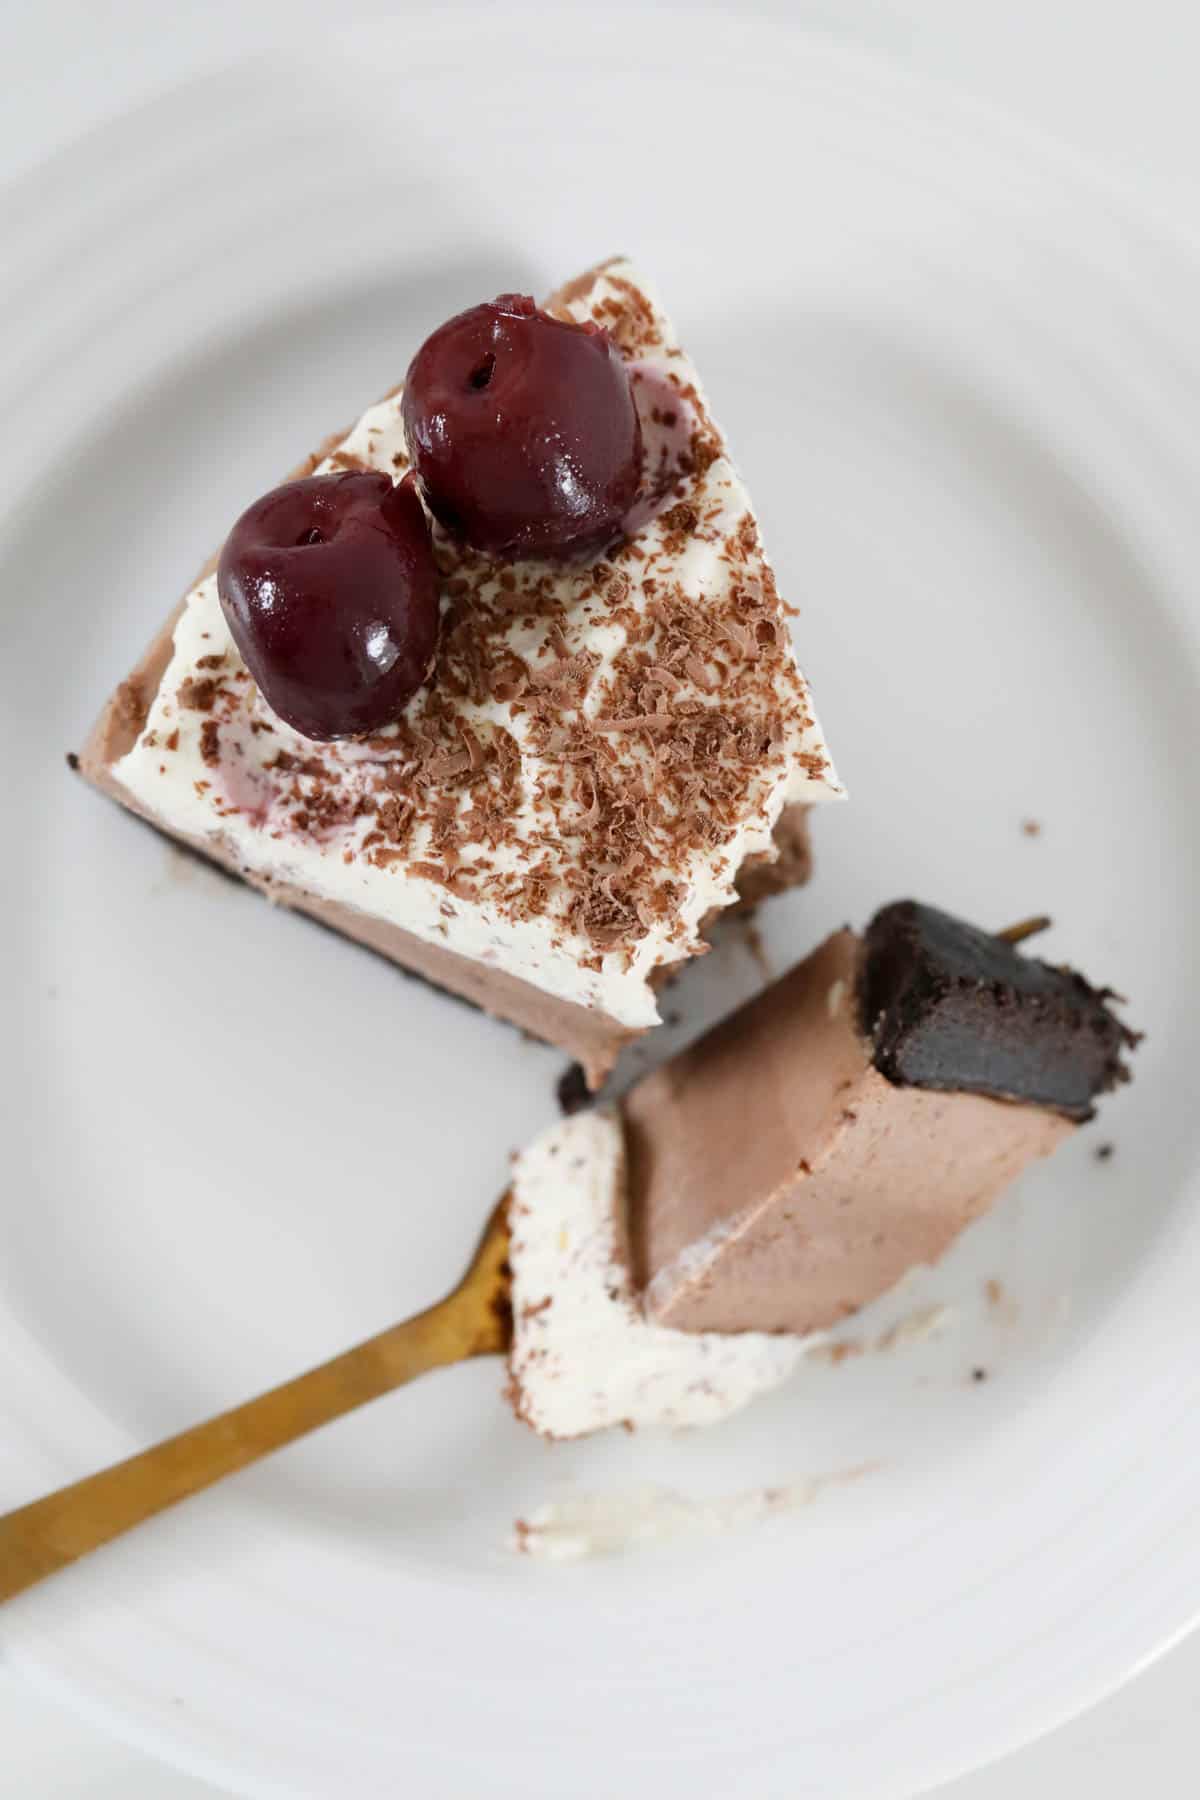 Overhead shot of a serve of black forest cheescake with some on a fork.